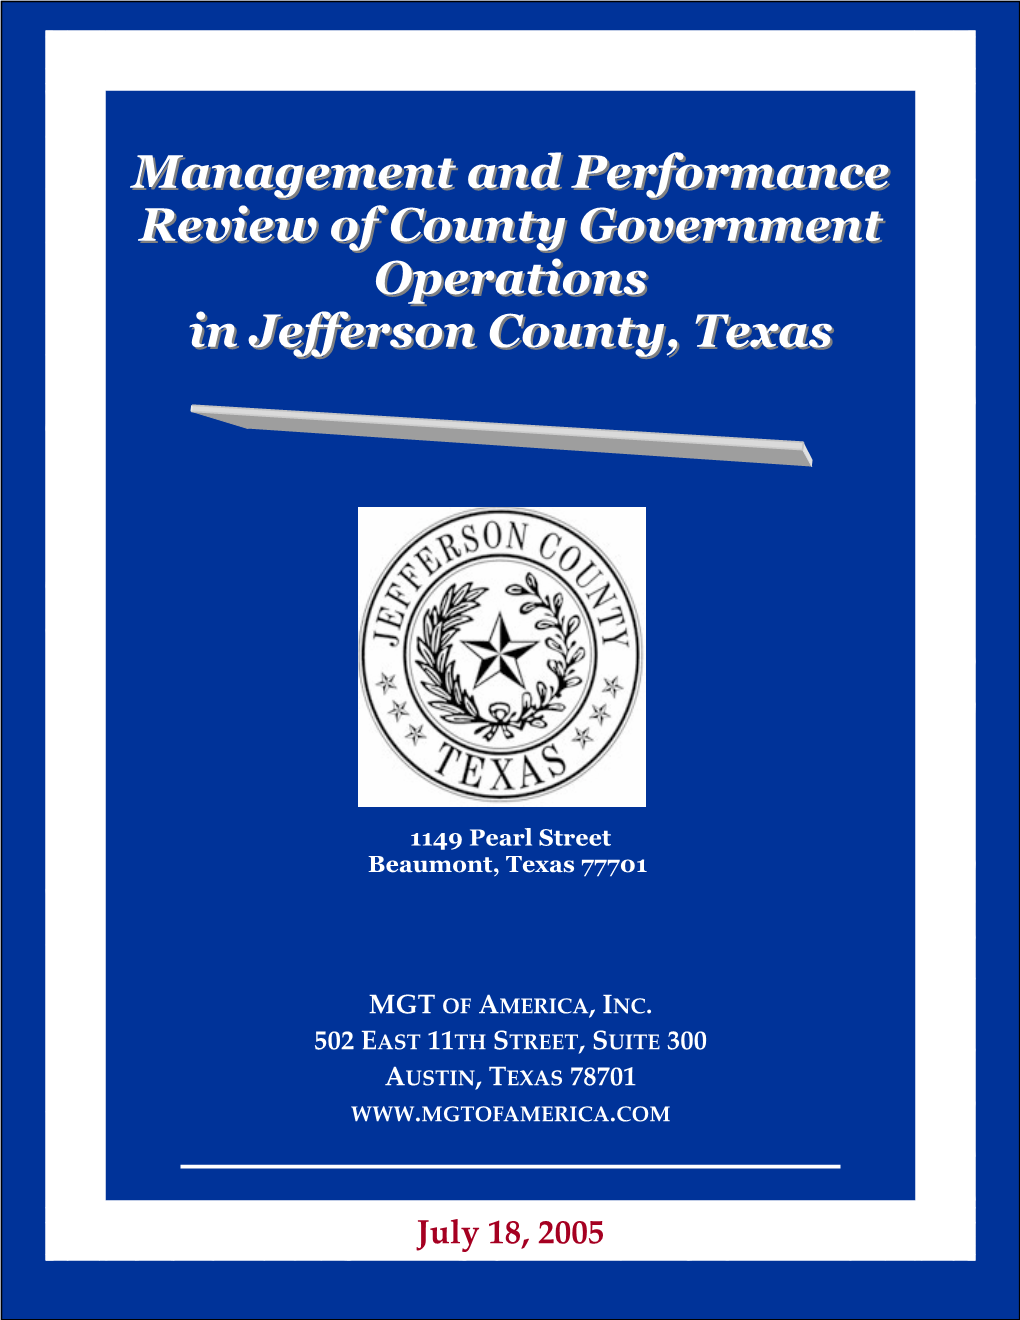 Performance Review of Jefferson County Government